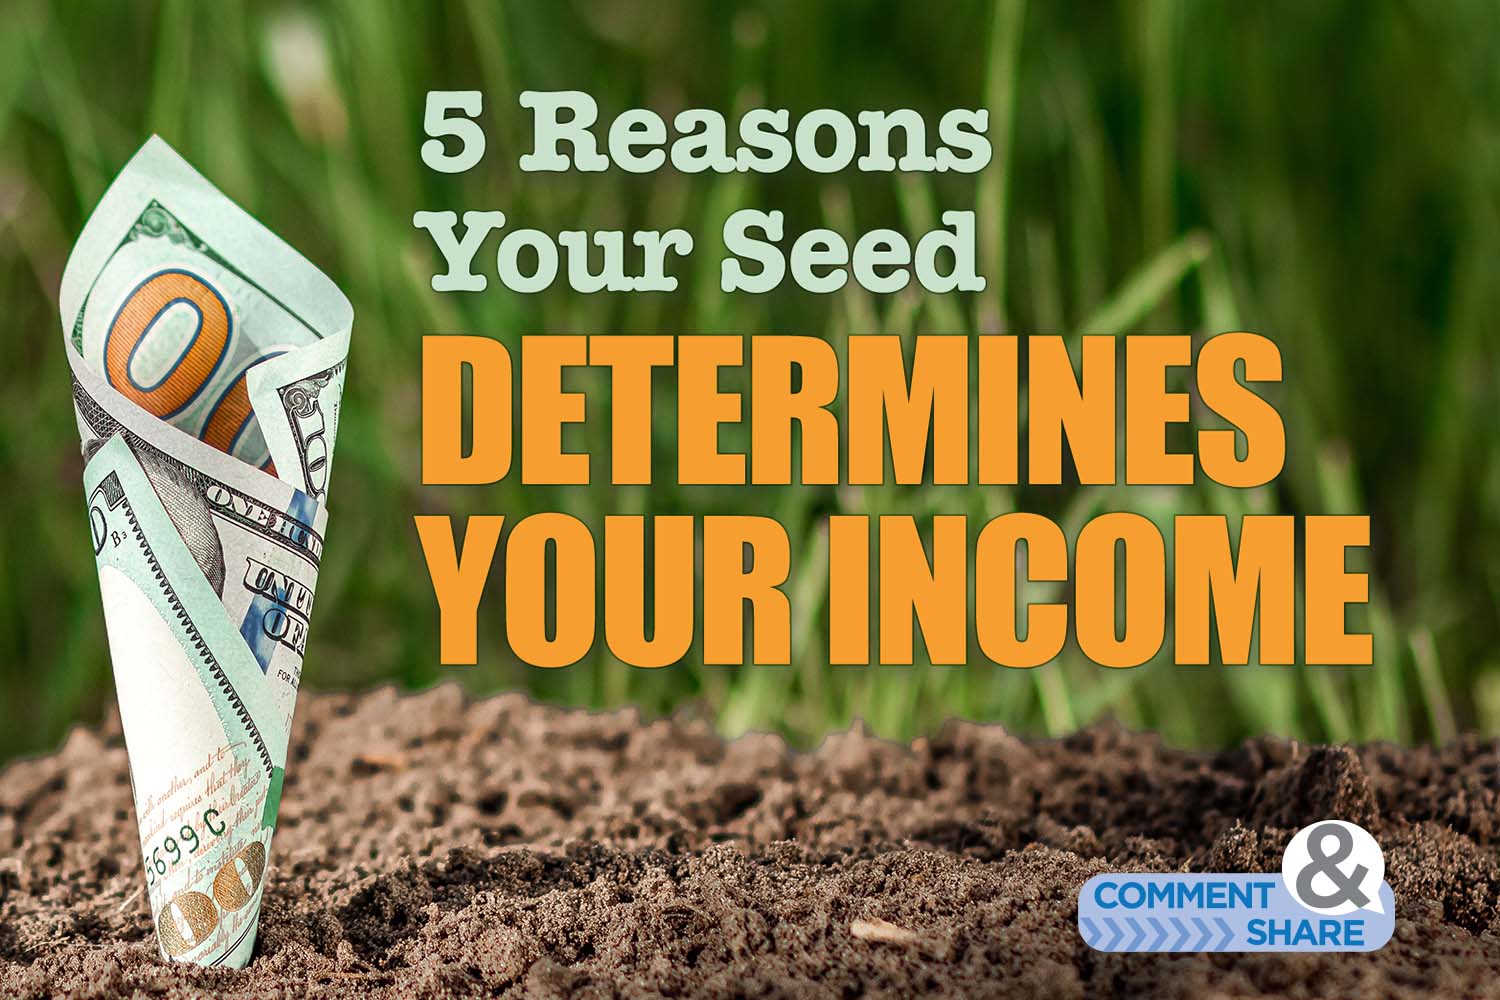 5 Reasons Your Seed Determines Your Income